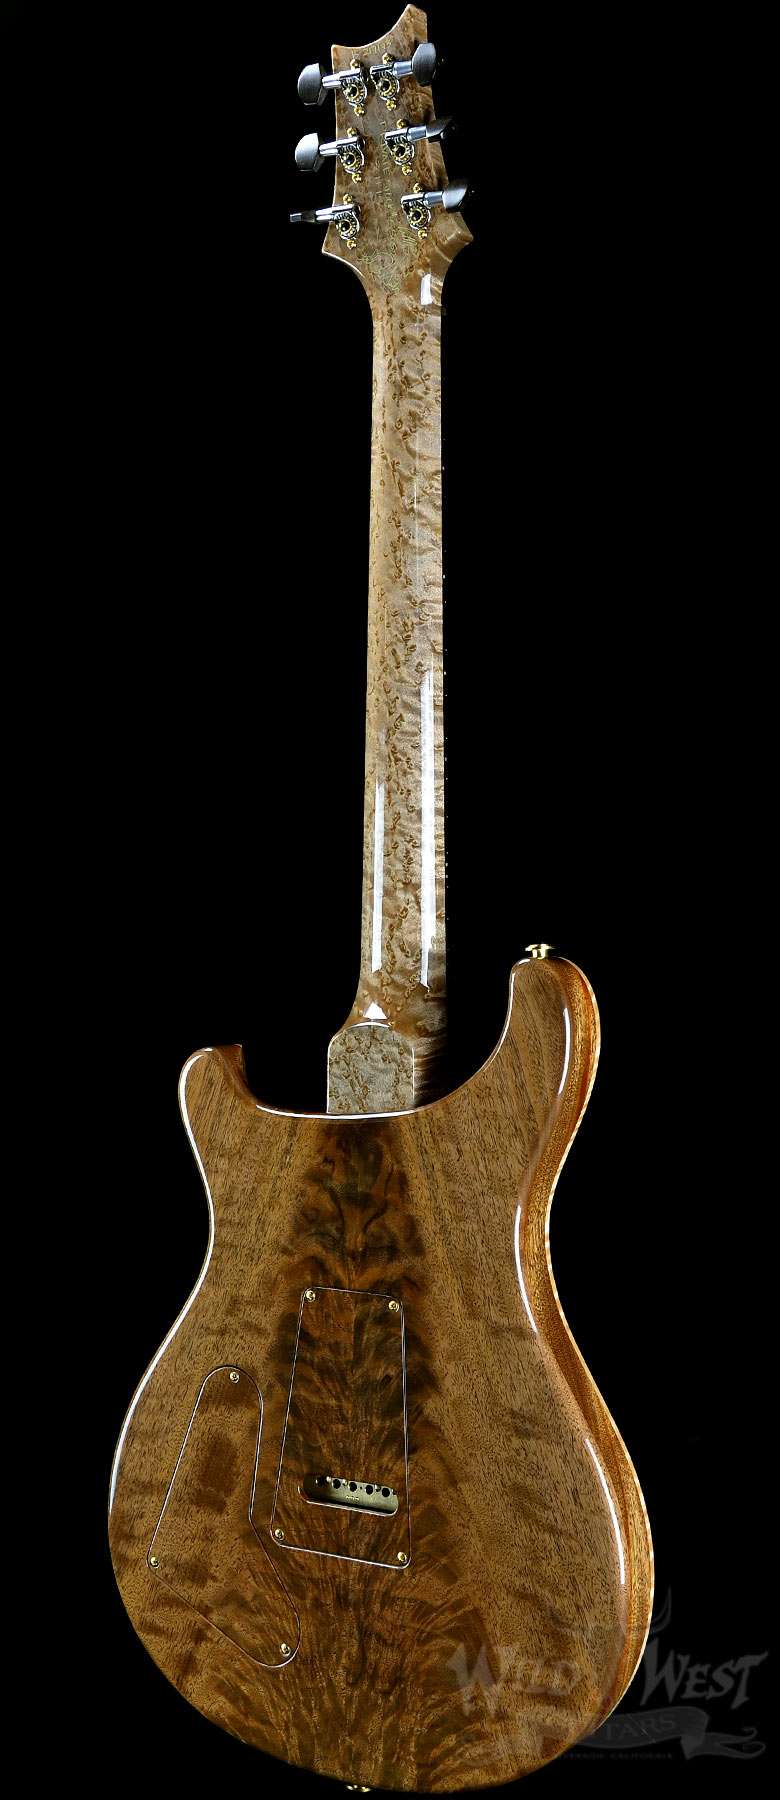 prs-mccarty-private-stock-5505-dirty-natural-217193-8_(3)__wwg.jpg